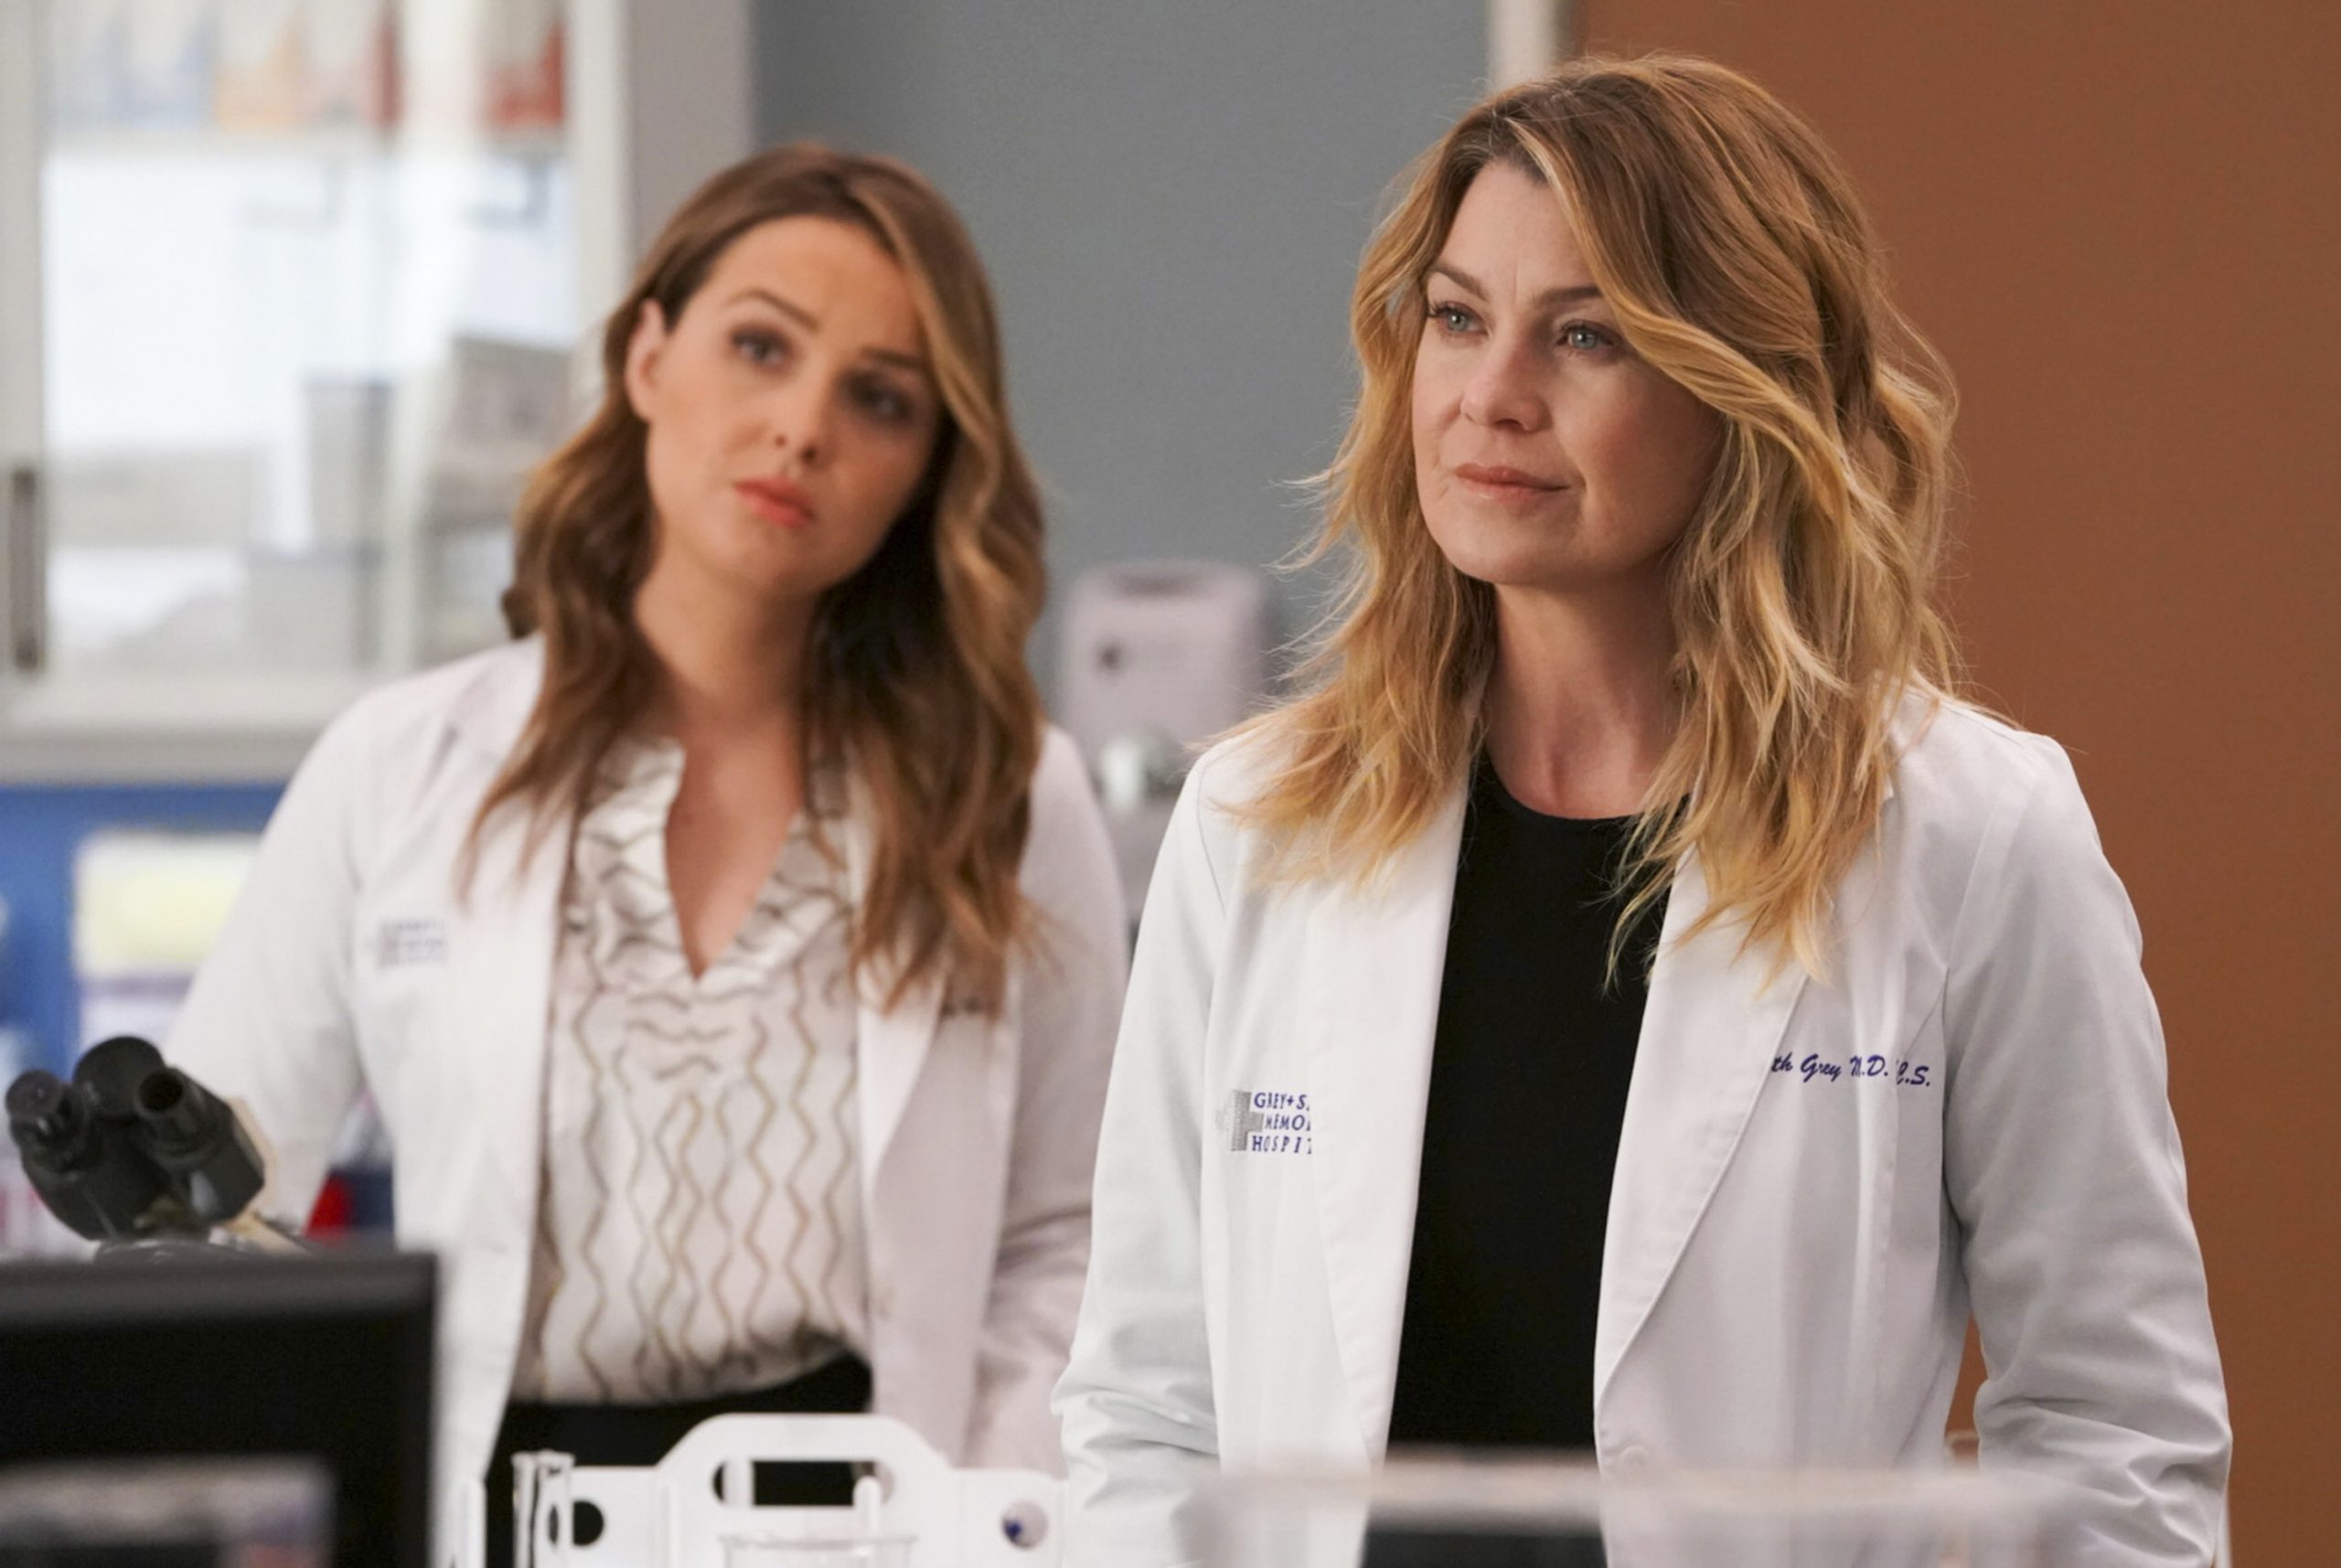 Index Of Grey S Anatomy Season 16 With Episode Schedule And Streaming Details Otakukart